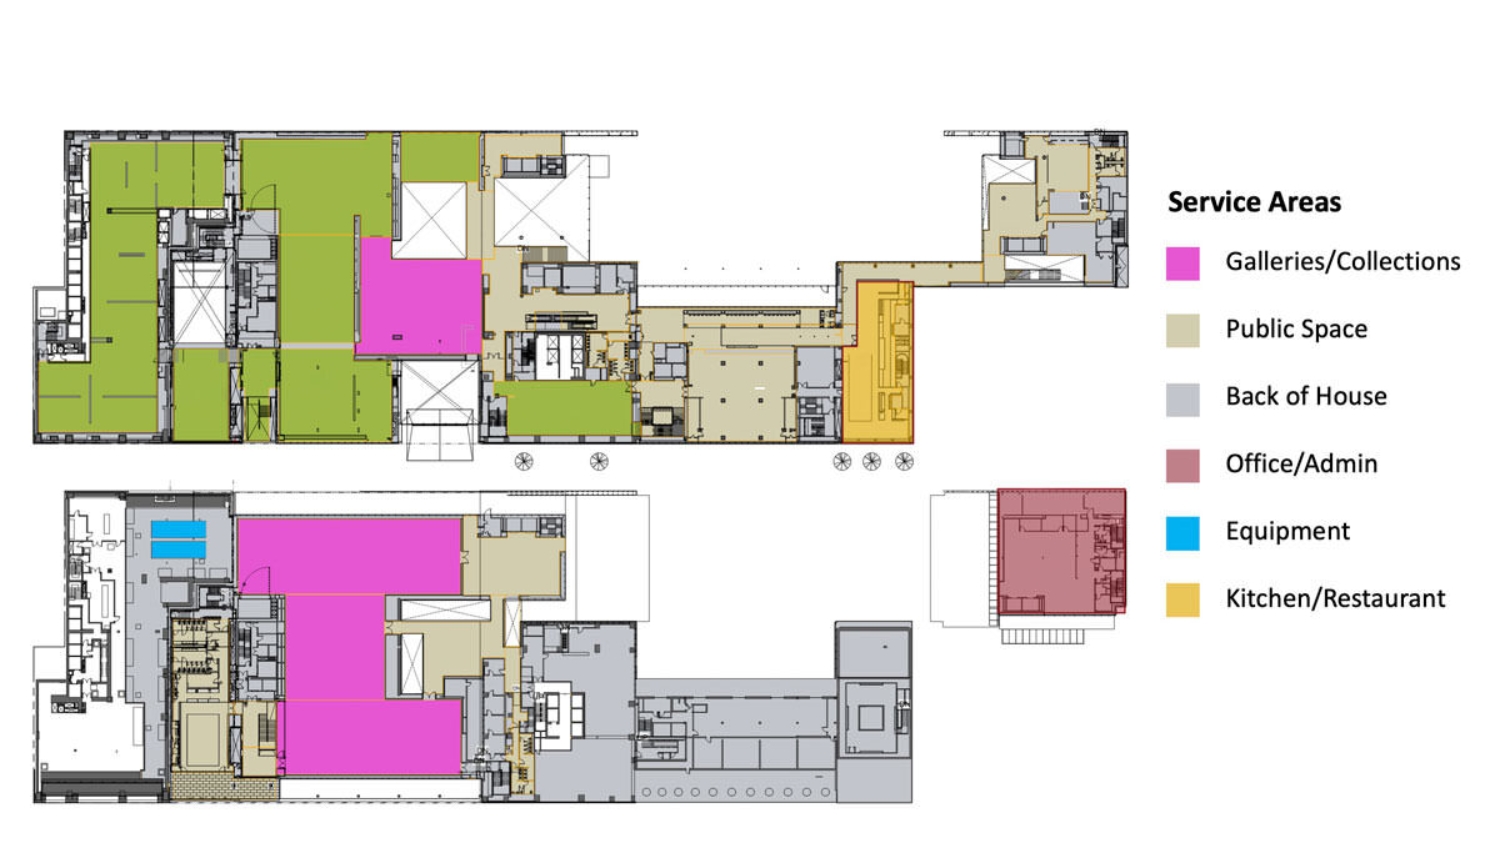 Floor plan showing two floors of one business with multiple uses including galleries, public space, offices, equipment, and kitchen/restaurant areas